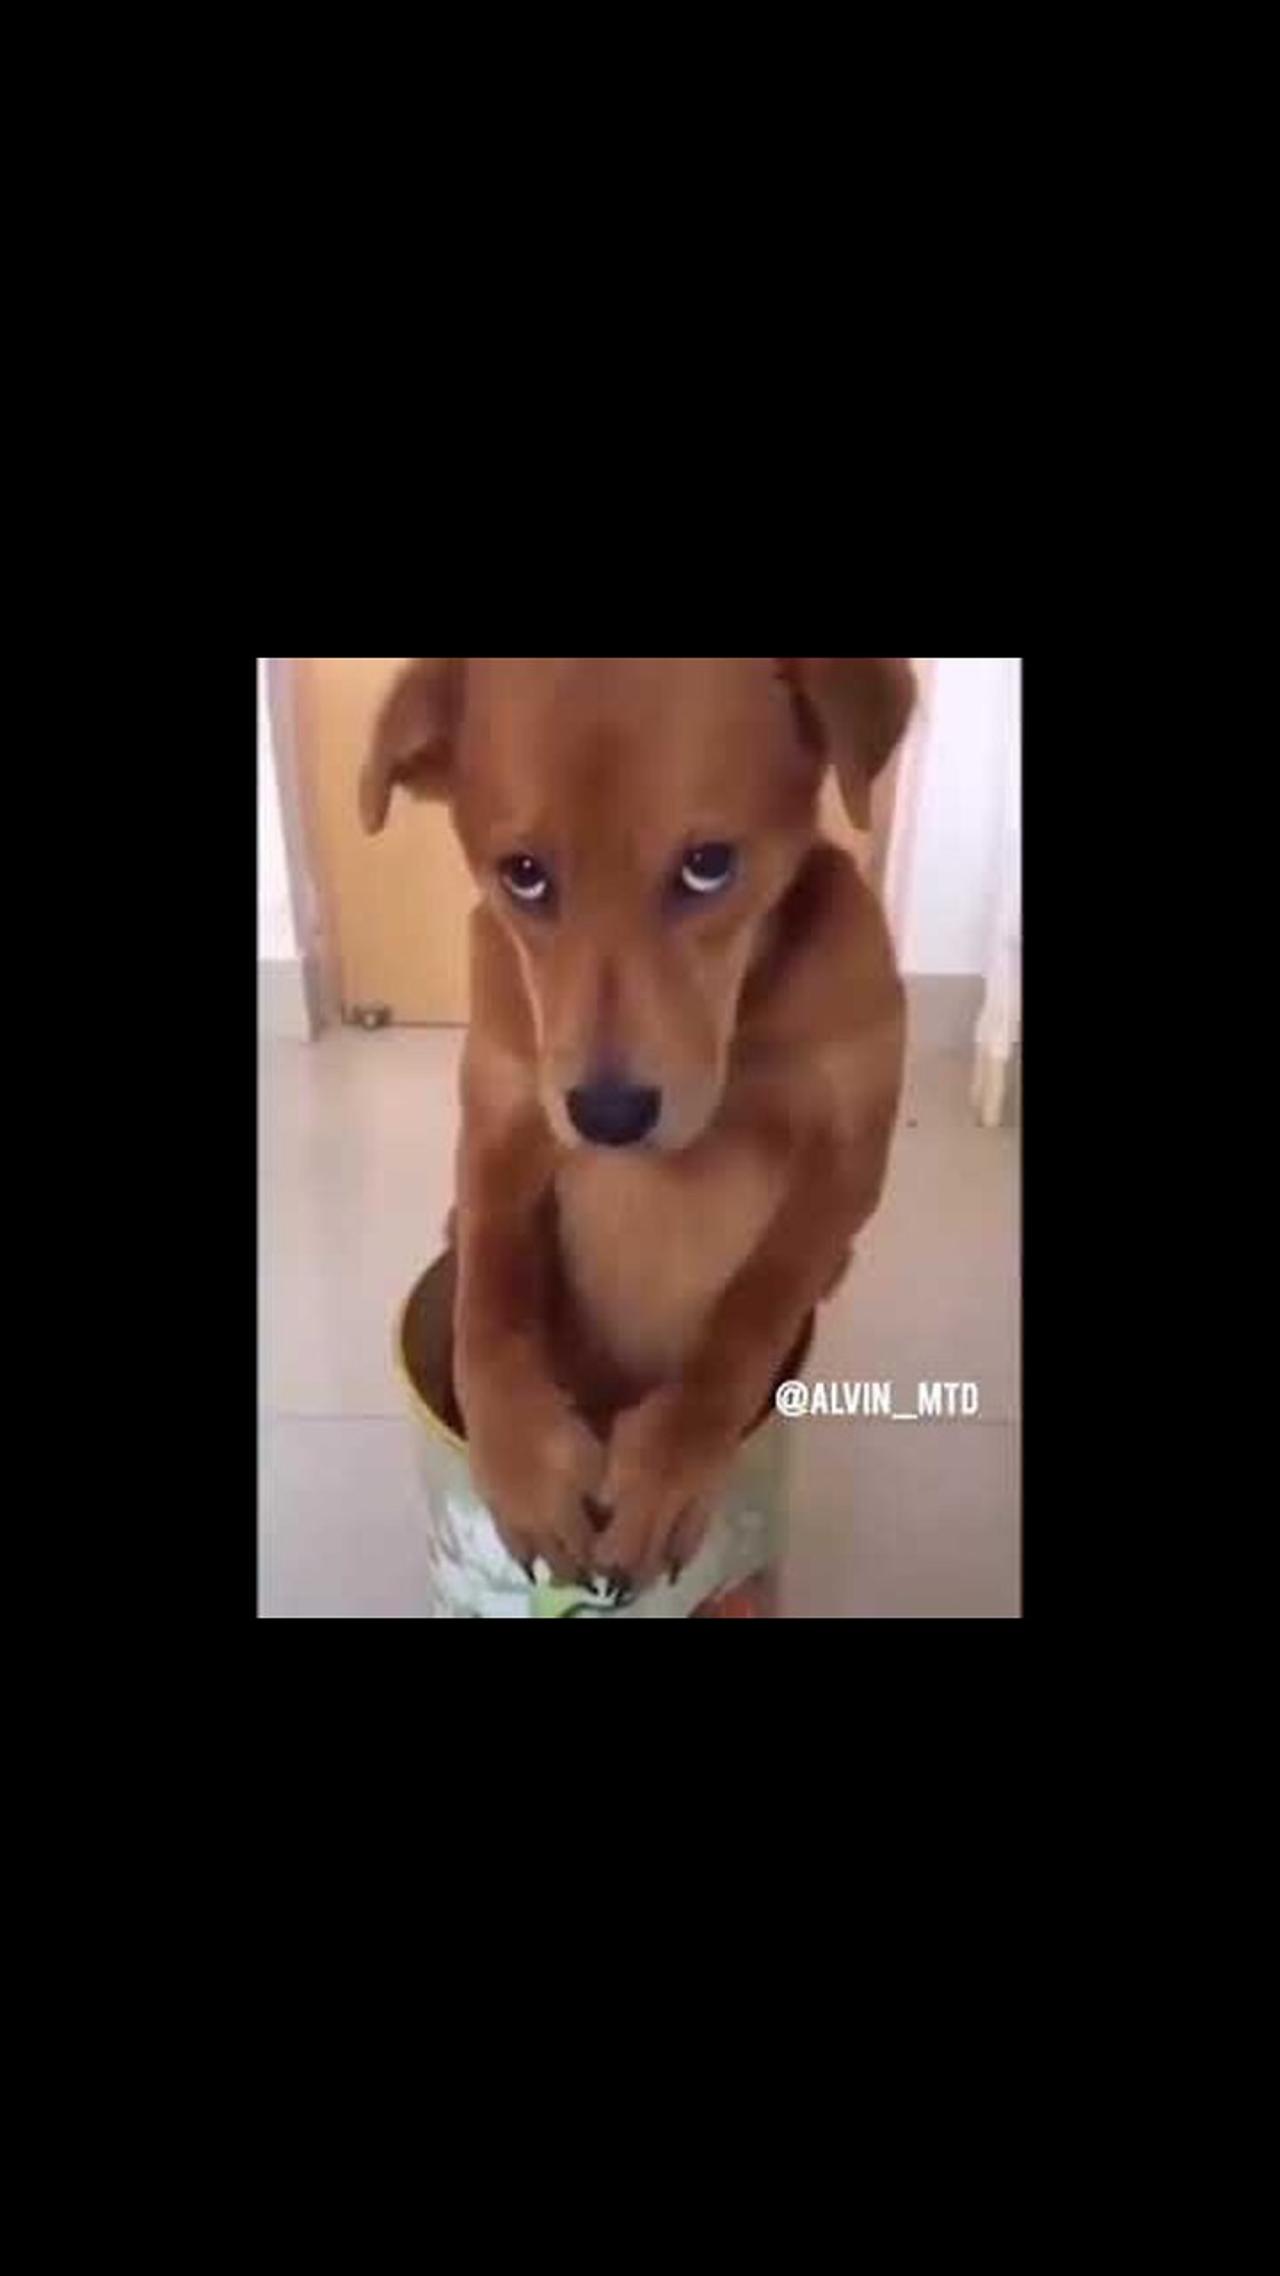 The funny WA story video is really funny.... Dog's reaction when angry